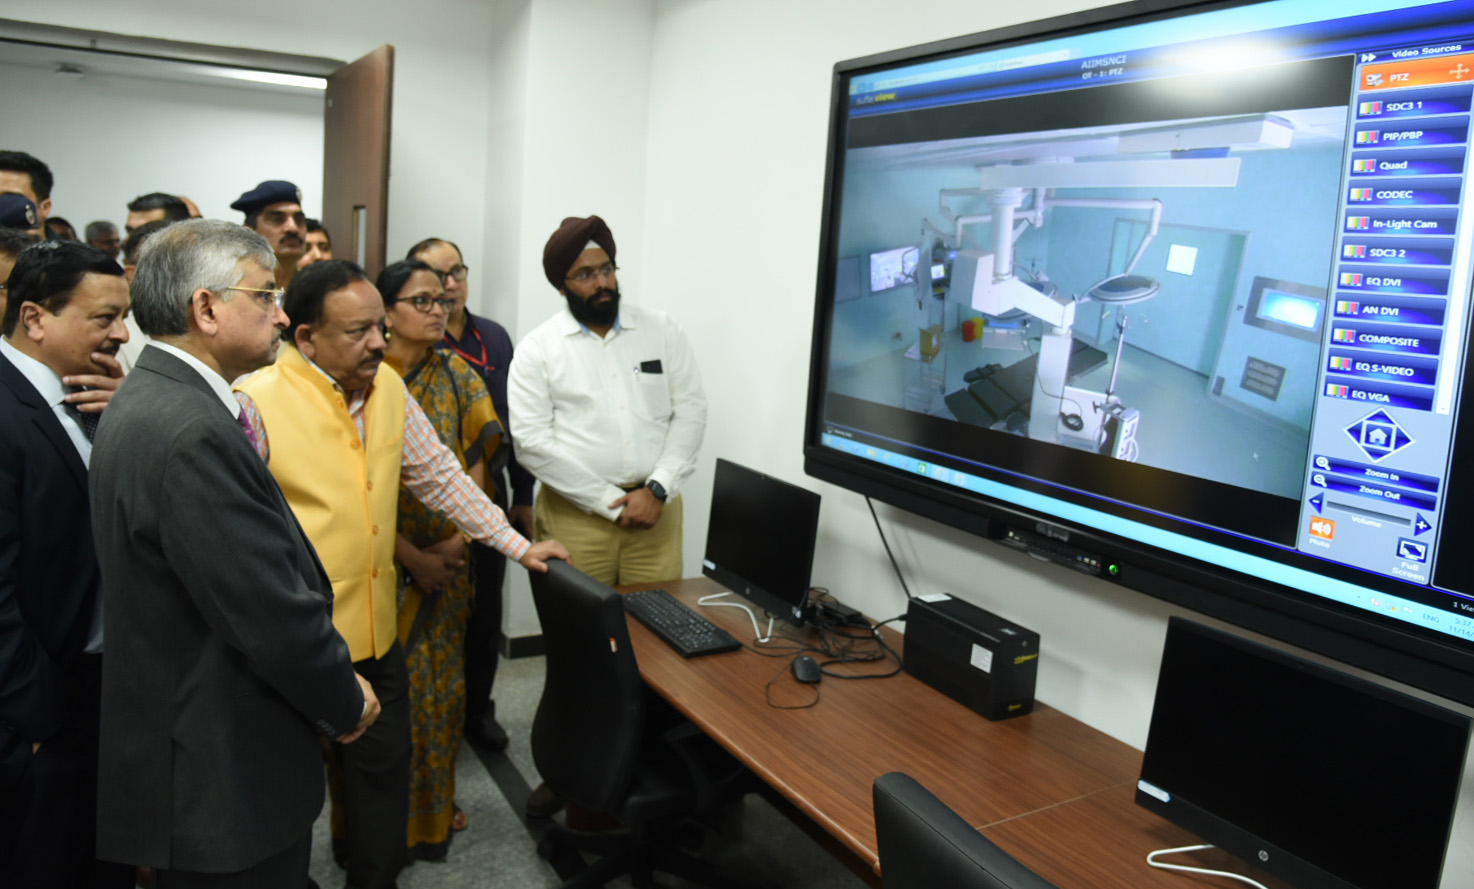 The Union Minister for Health & Family Welfare, Science & Technology and Earth Sciences, Dr. Harsh Vardhan visiting the National Cancer Institute, at Jhajjar, in Haryana on November 14, 2019.